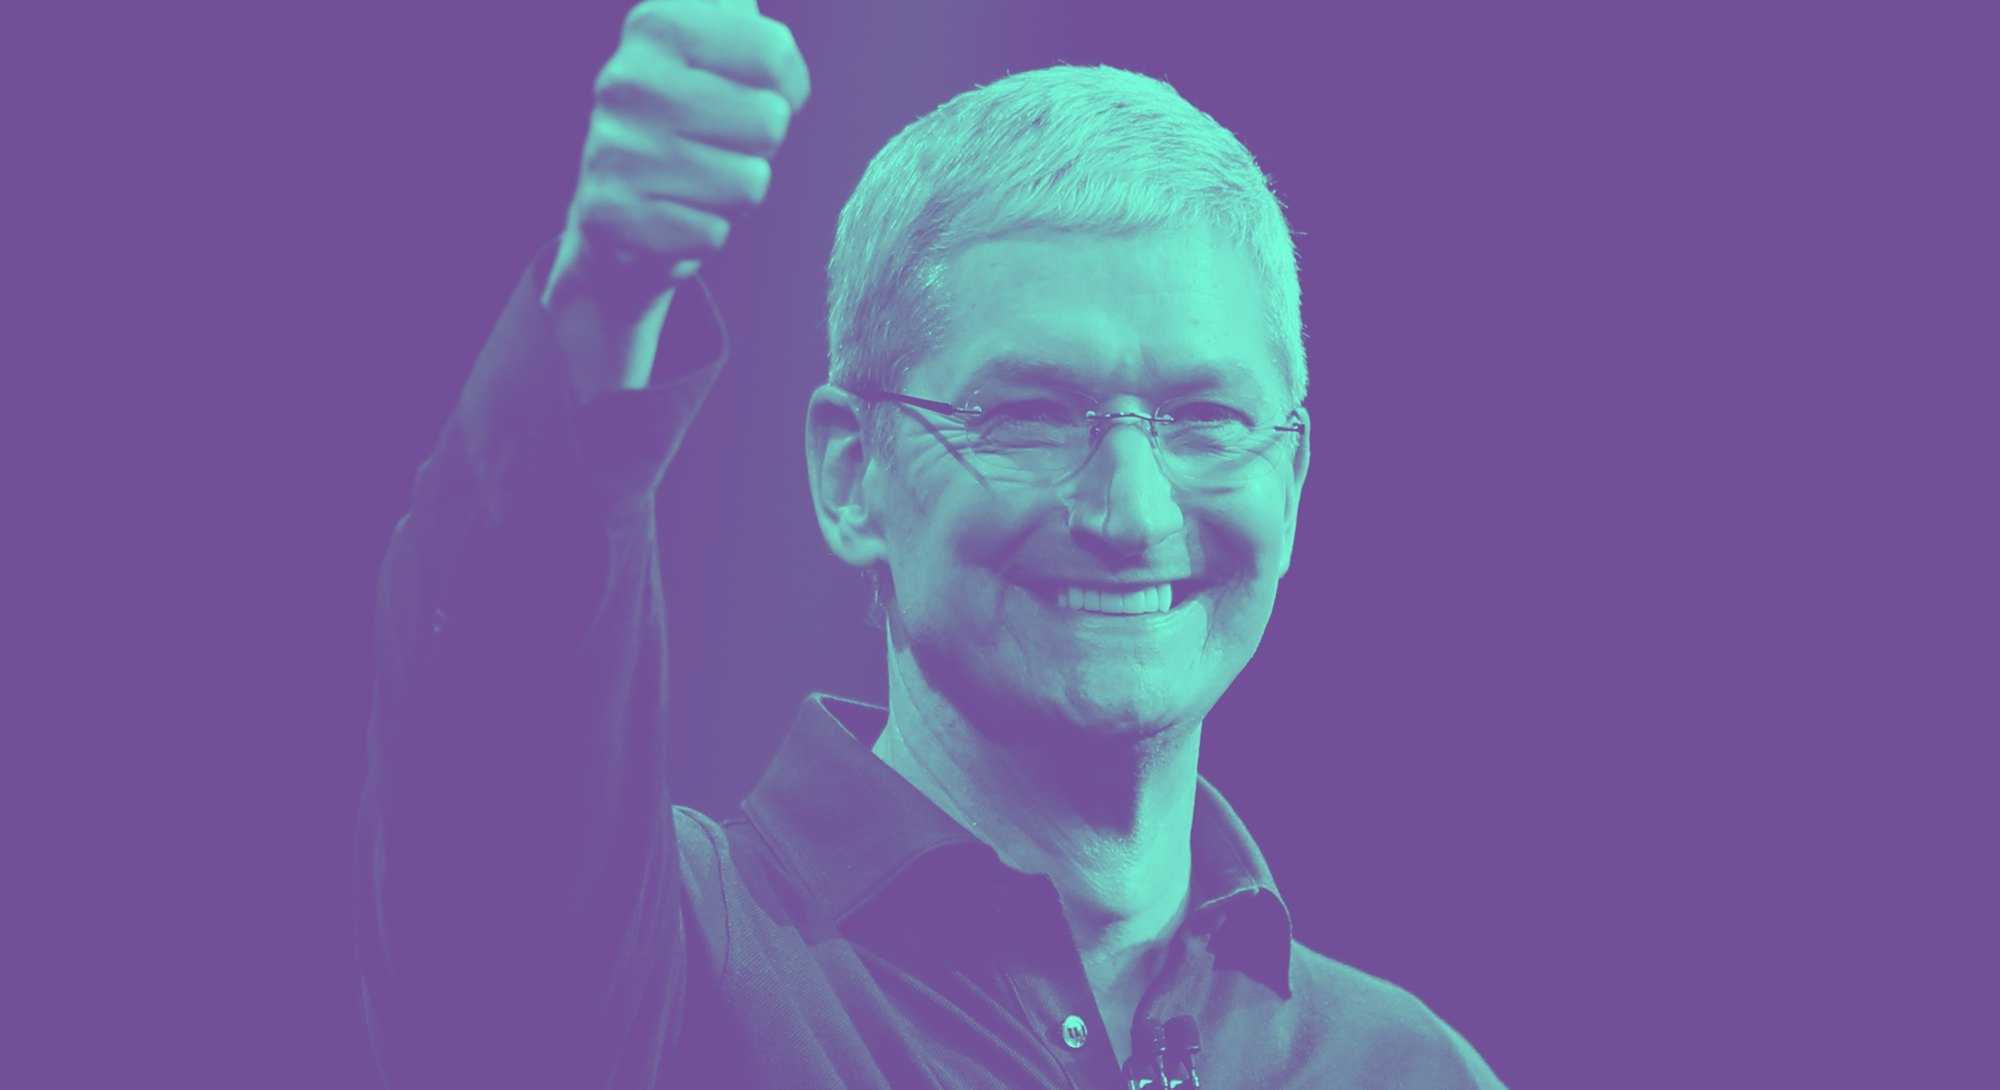 Apple's Tim Cook delivers the keynote address at the Worldwide Developers Conference, Monday morning...